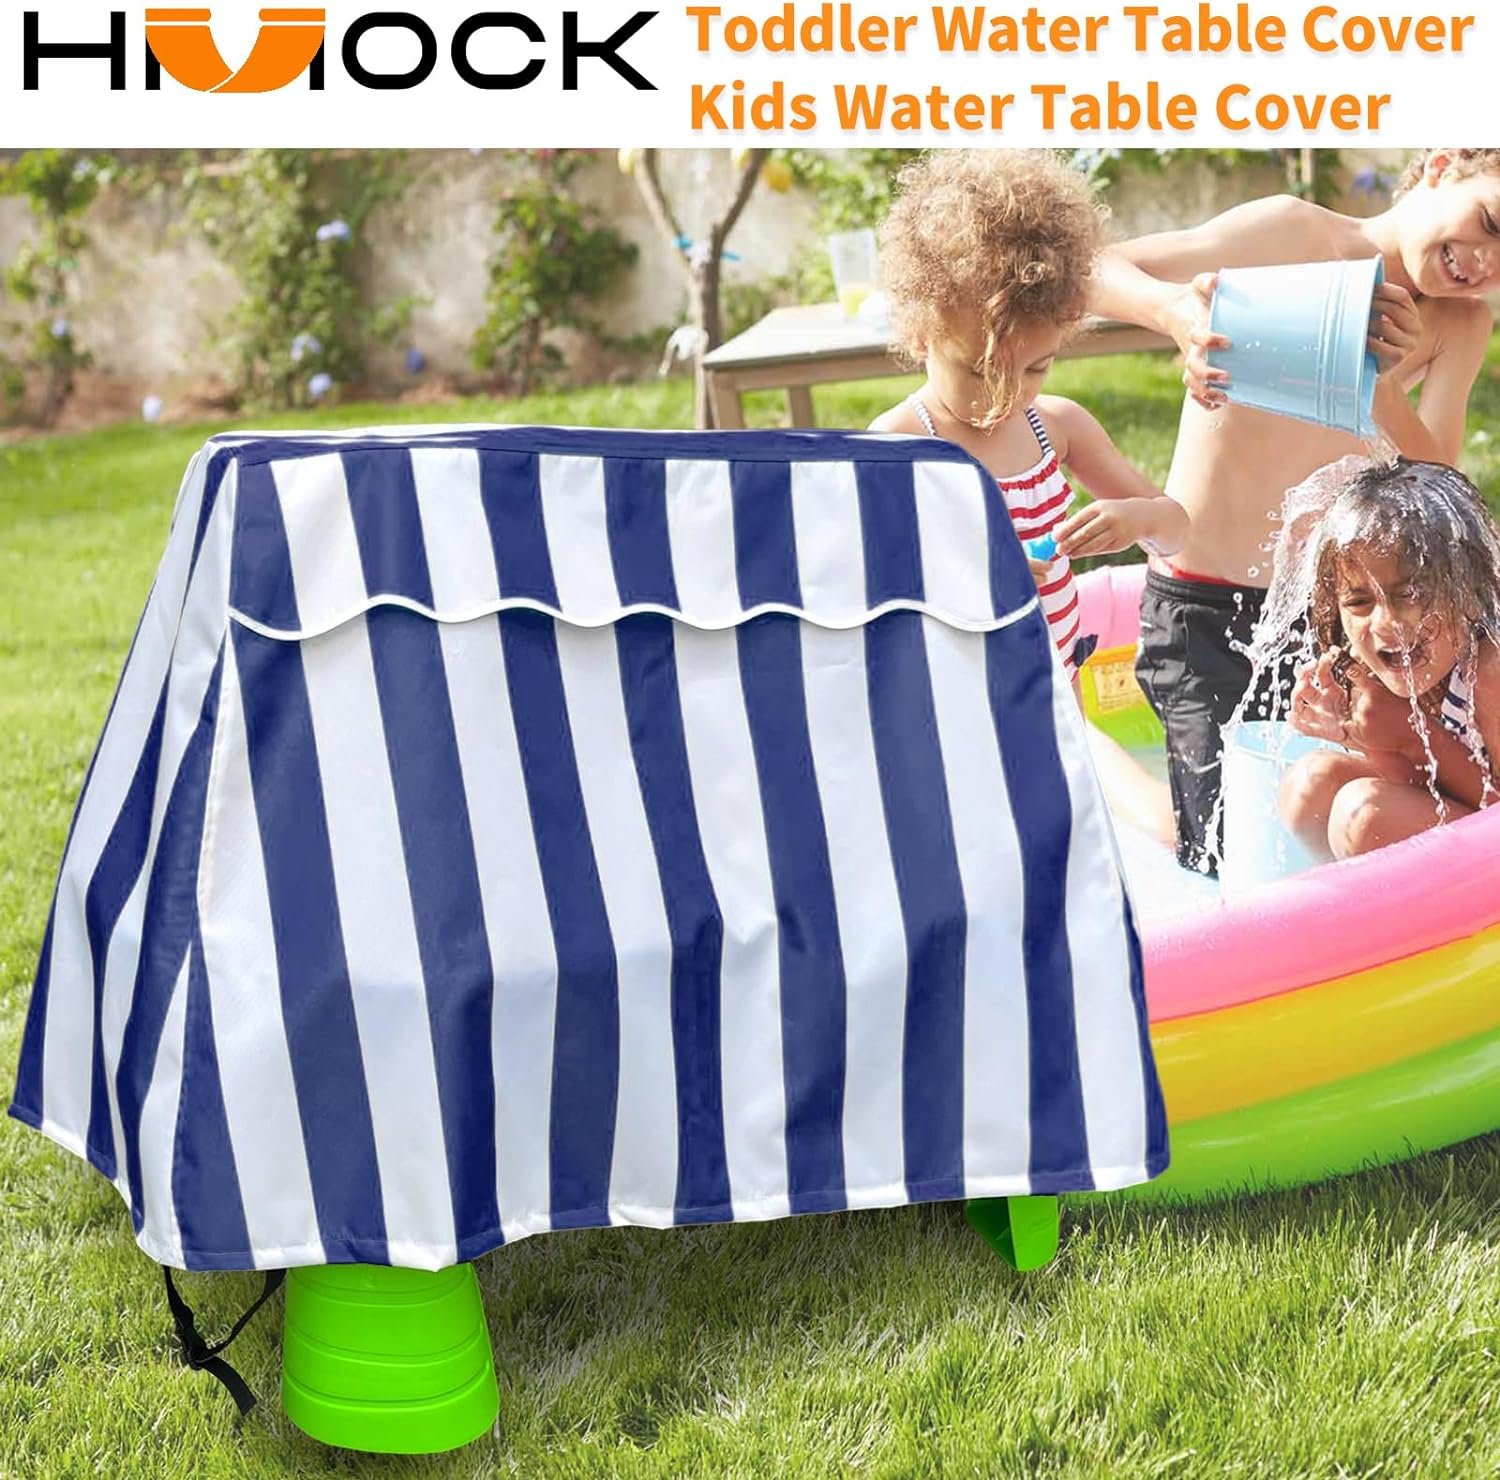 Kids Water Table Cover Fit Step 2 Water Table, Outdoor Table Cover For Step 2 Rain Showers Splash Pond Water Table,Outdoor Water Table Toys Cover for Water Table for Toddlers 1-3 -Cover Only